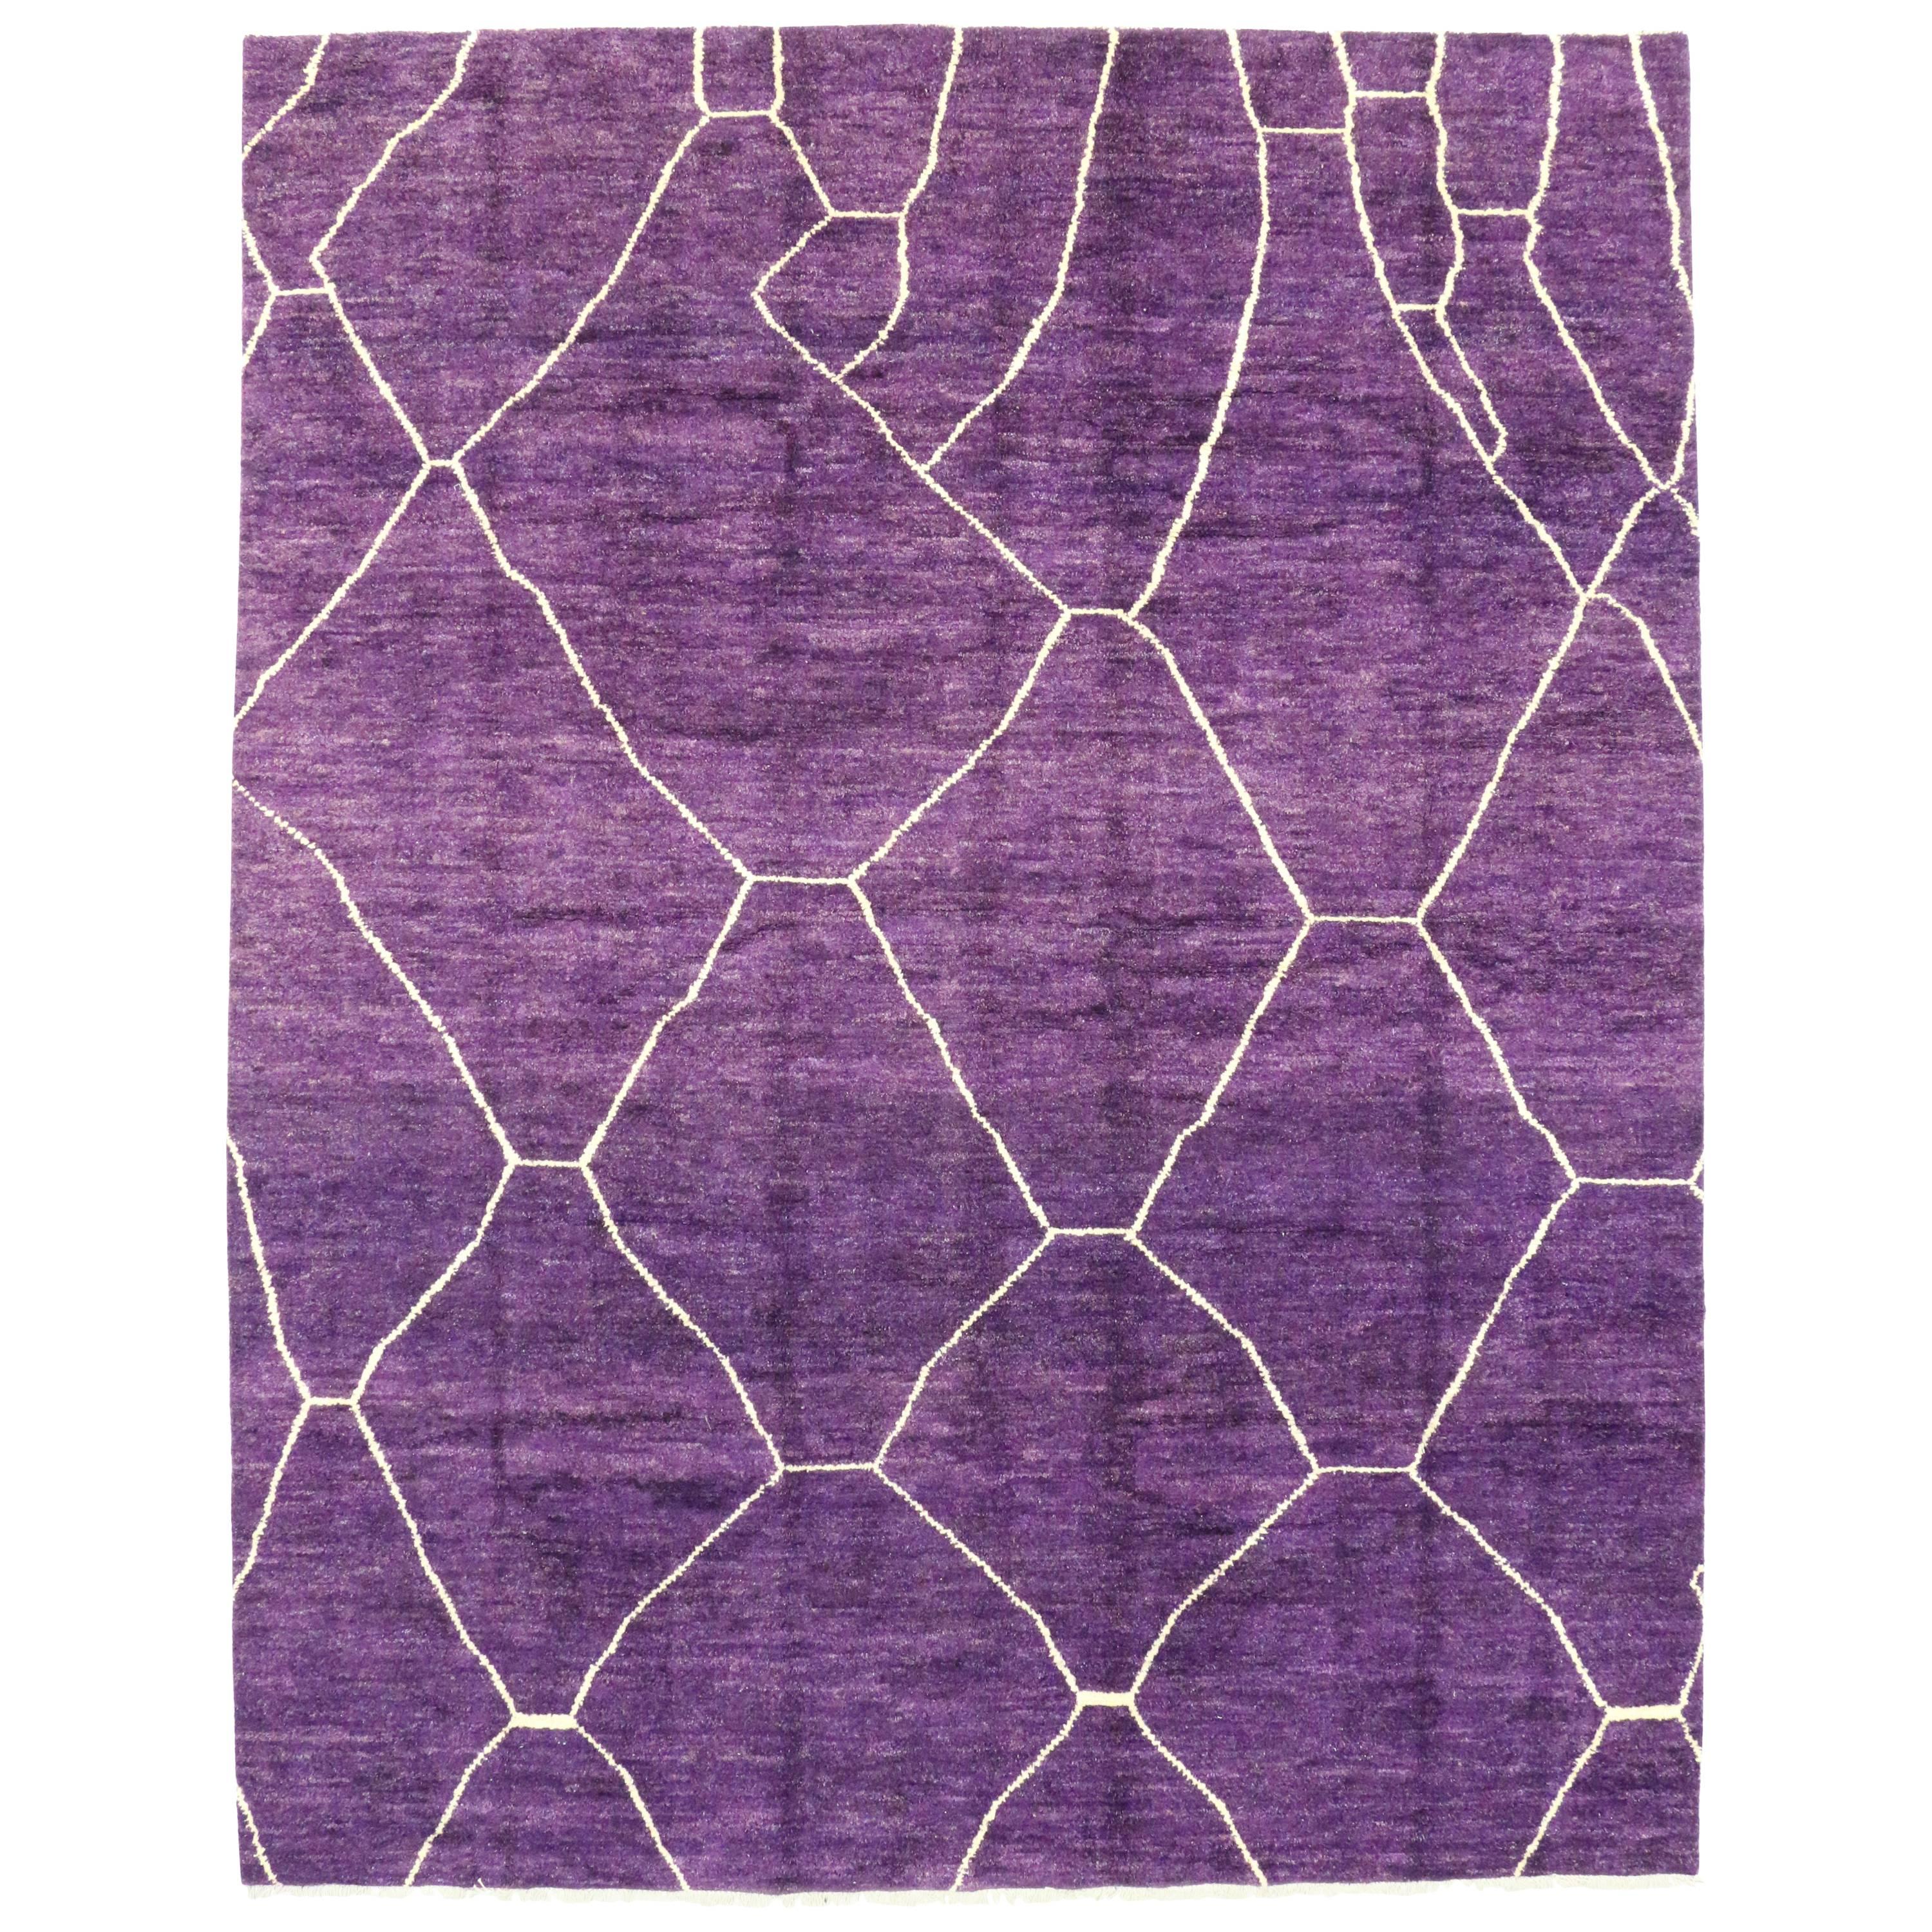 Contemporary Purple Amethyst Moroccan Style Rug with Boho Chic Style